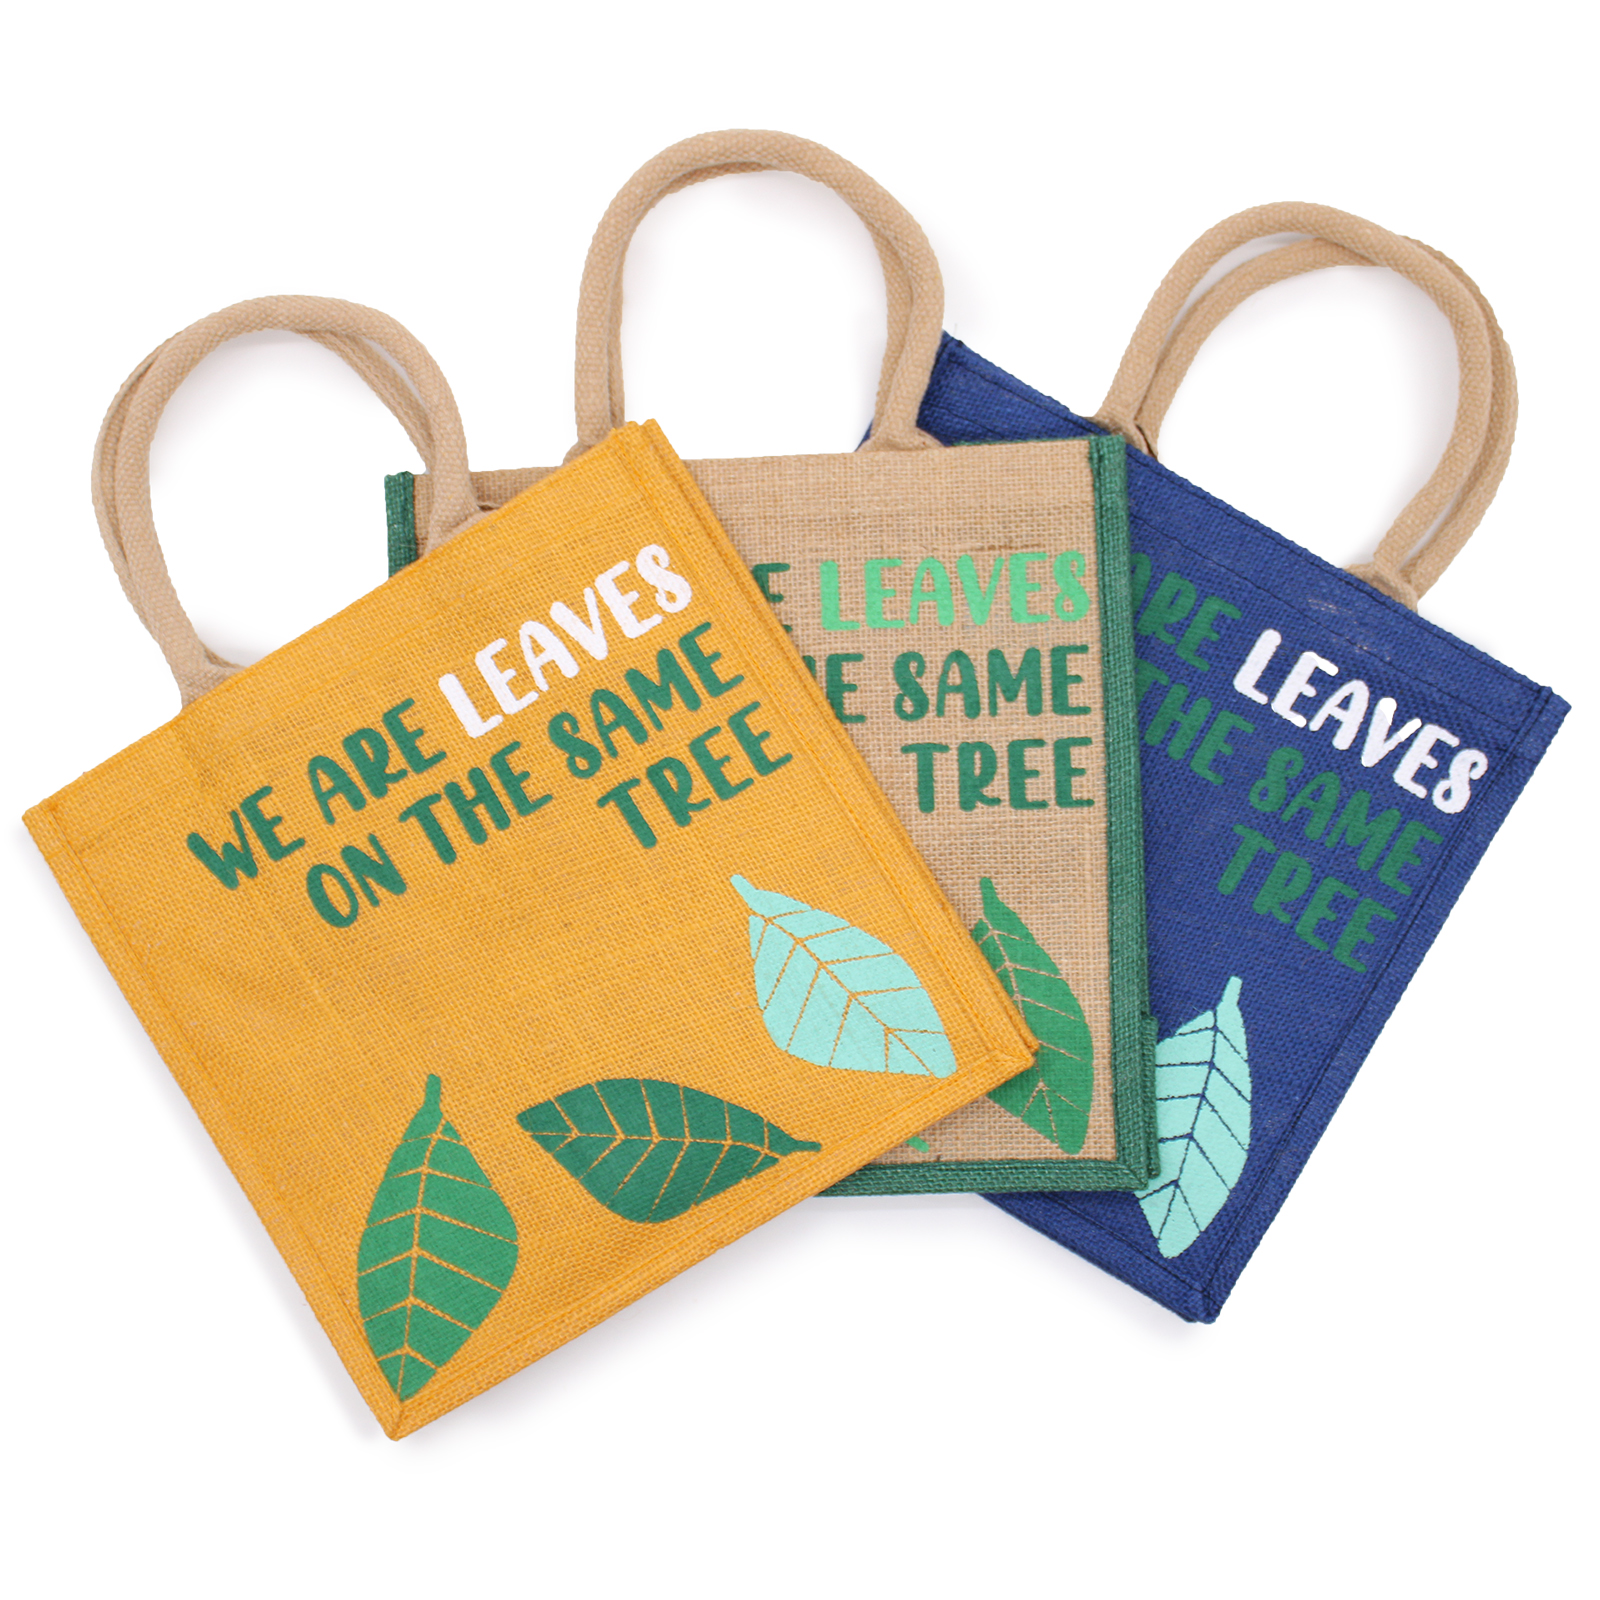 All about Eco-Friendly Jute Bags Uses Benefits and Wide Application